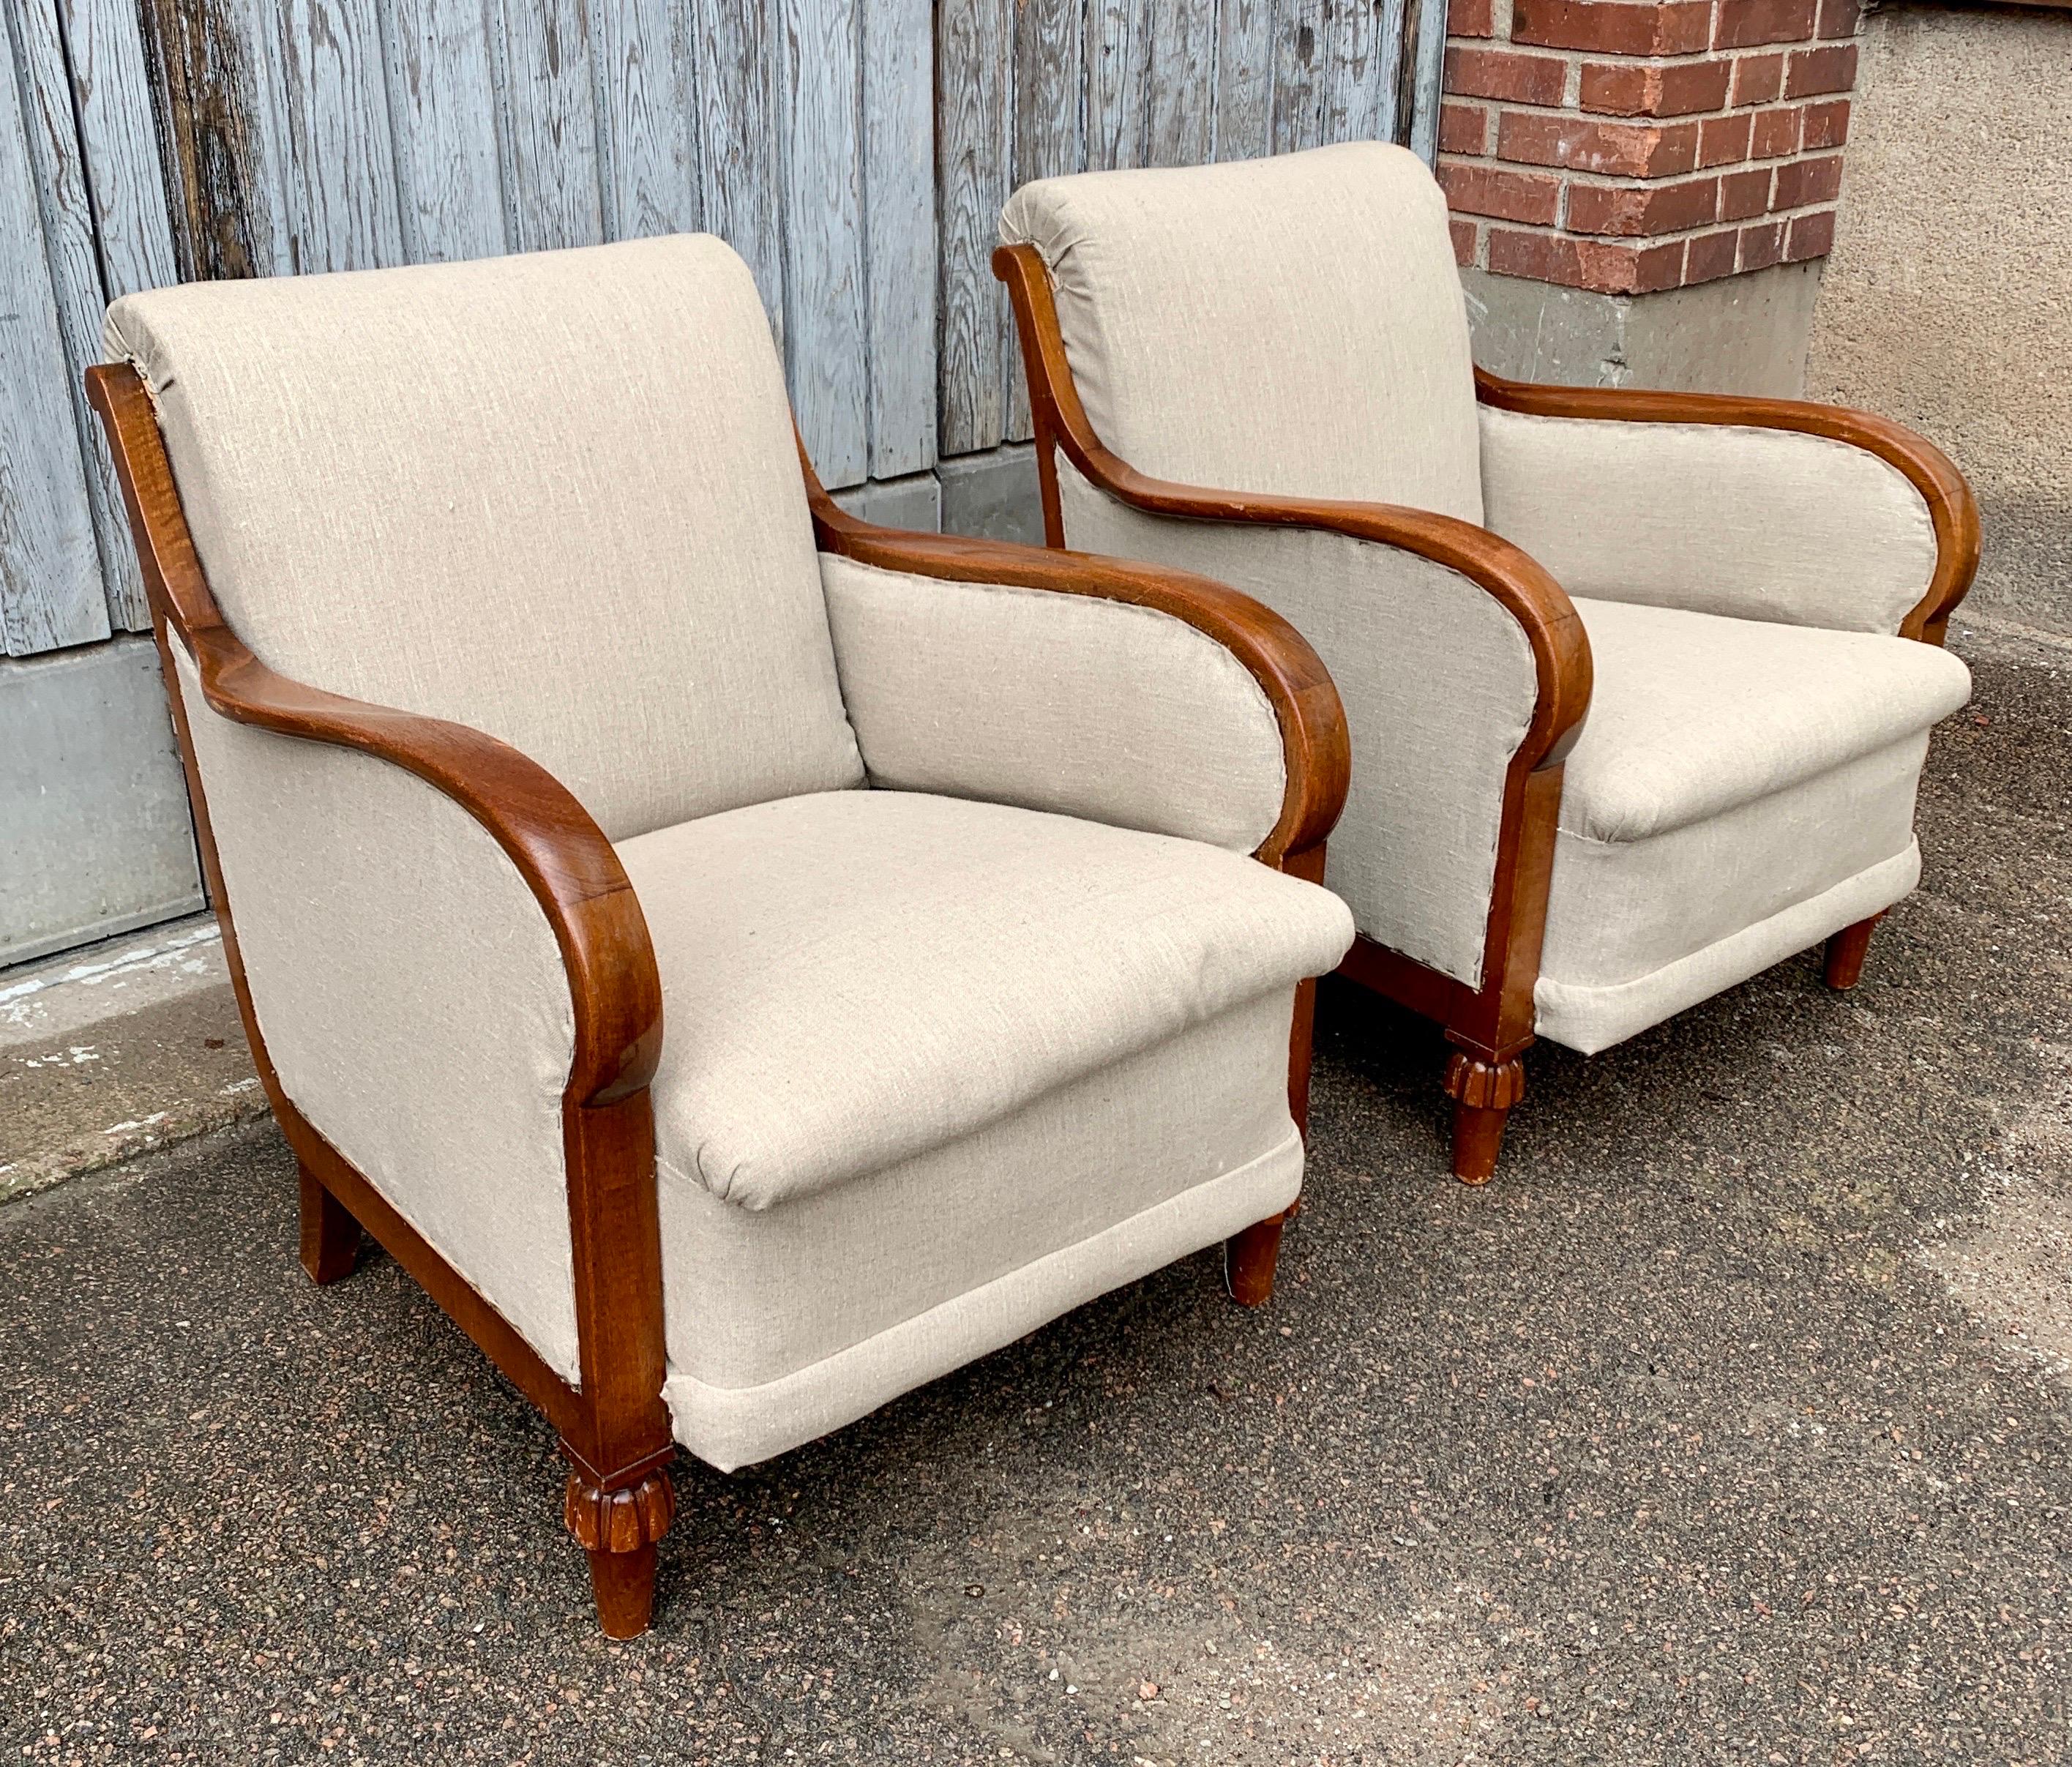 Hand-Crafted Pair of Large Swedish 19th Cantury Oak Armchairs in Beige Fabric